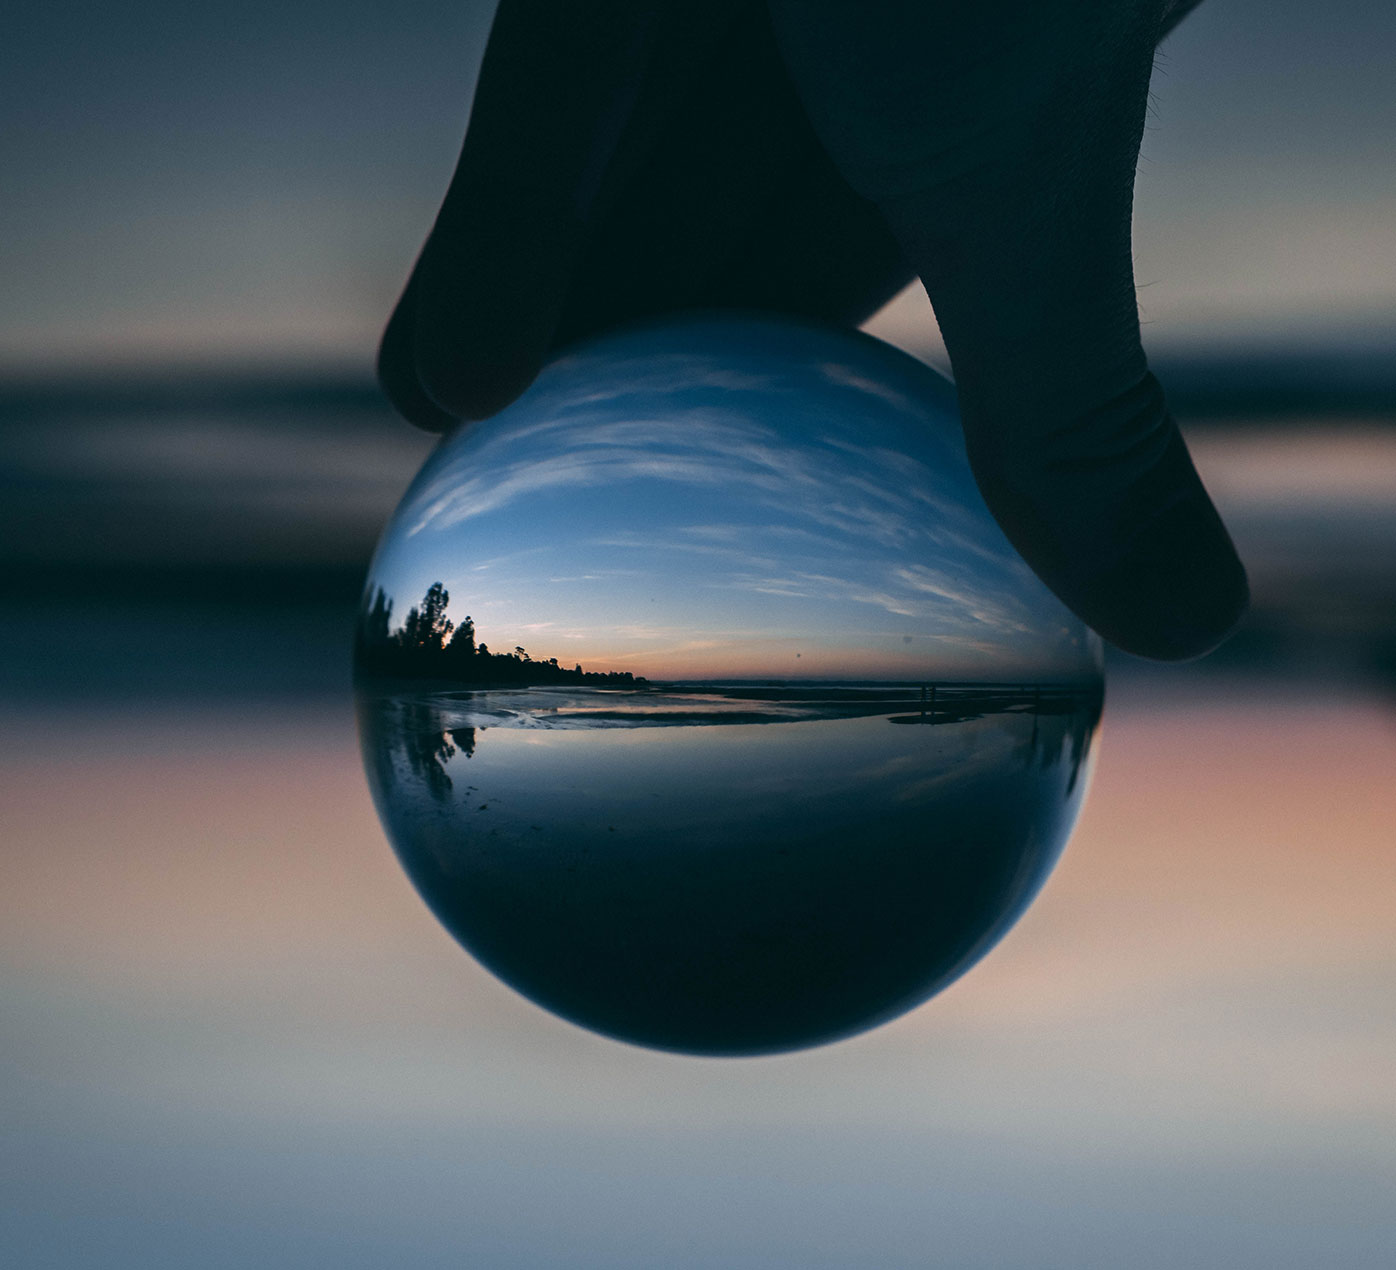 Inverted view of the horizon through a glass ball